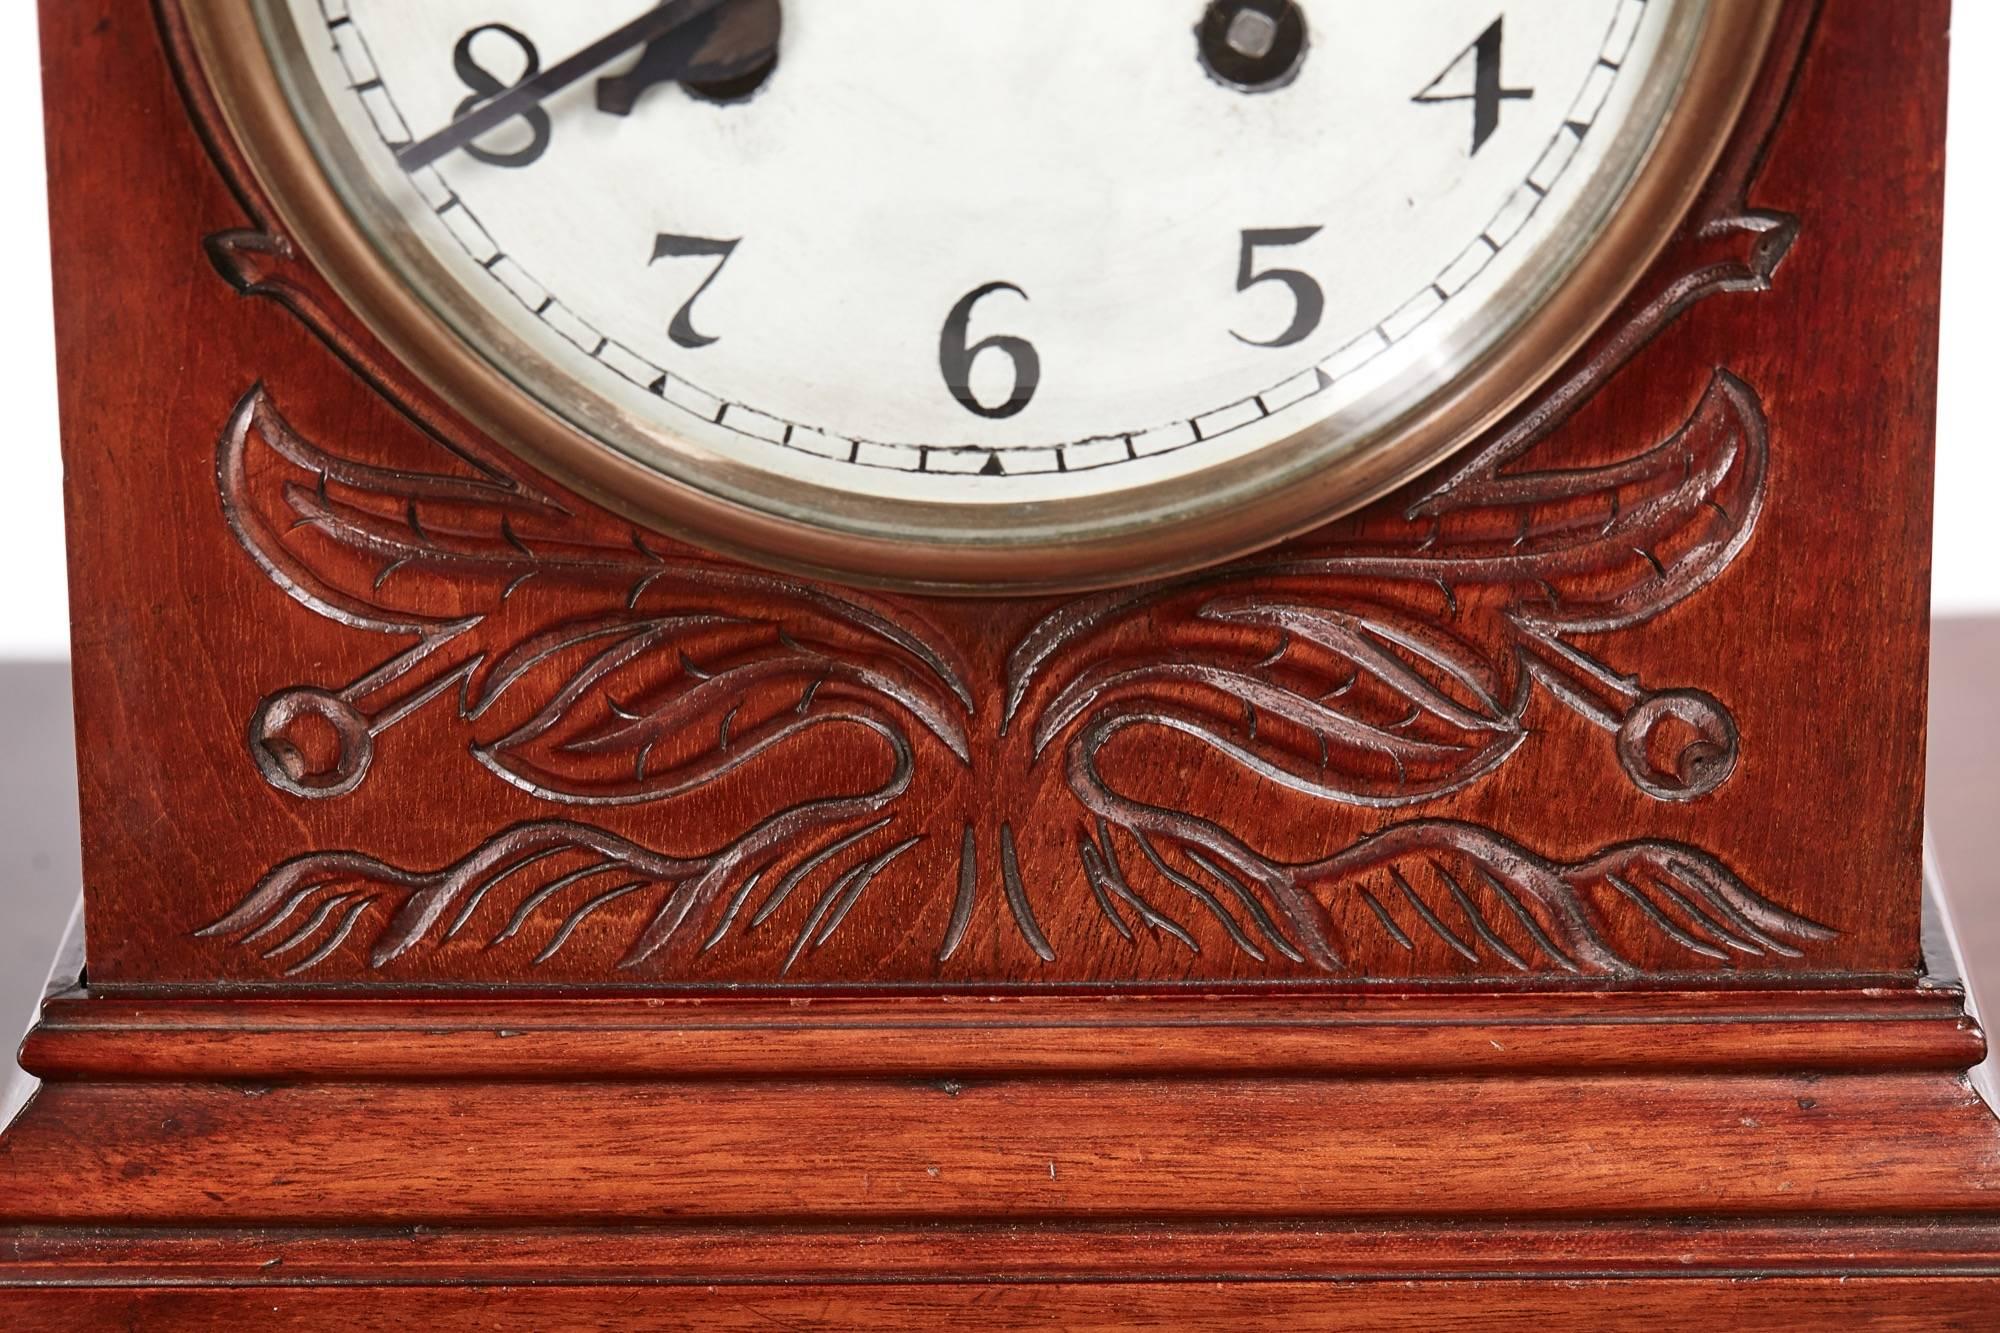 Edwardian carved mahogany mantel clock, with an arch top, well carved mahogany case with a stepped base standing on brass ball feet, enamel dial has a brass bezel and convex bevel edge glass, eight day movement striking the hour and halves on a